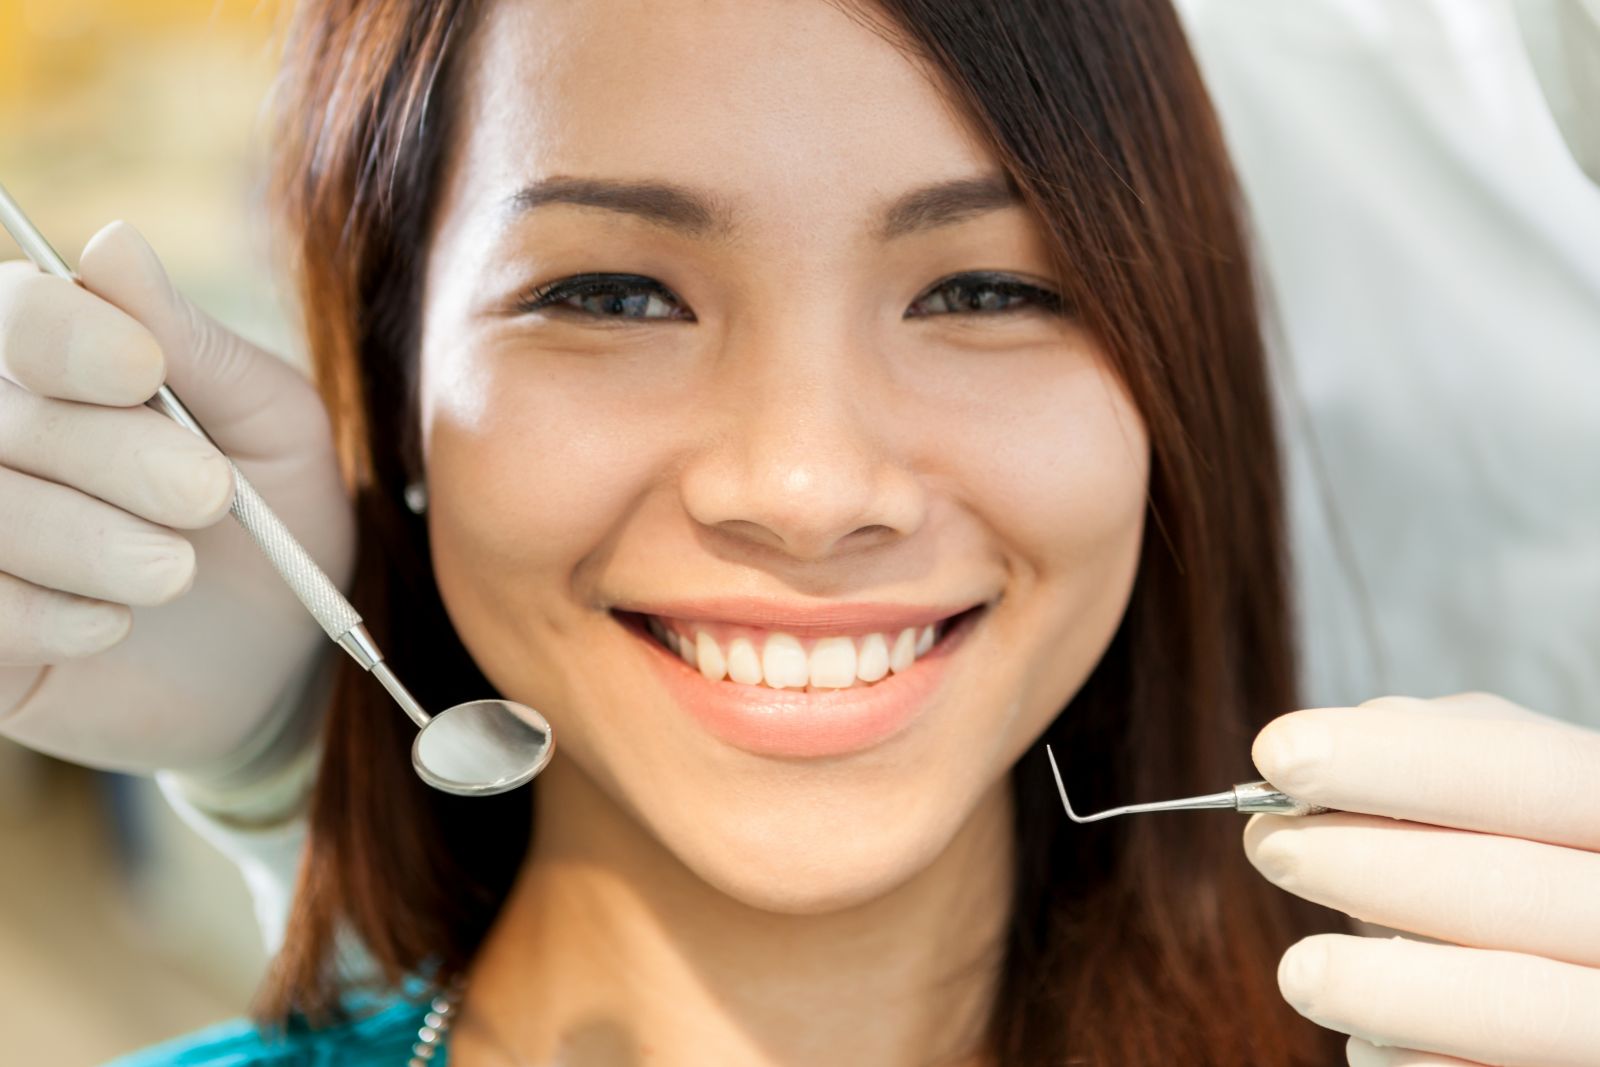 Professional dental cleanings by your Naperville dentist are an important way to keep your teeth healthy.